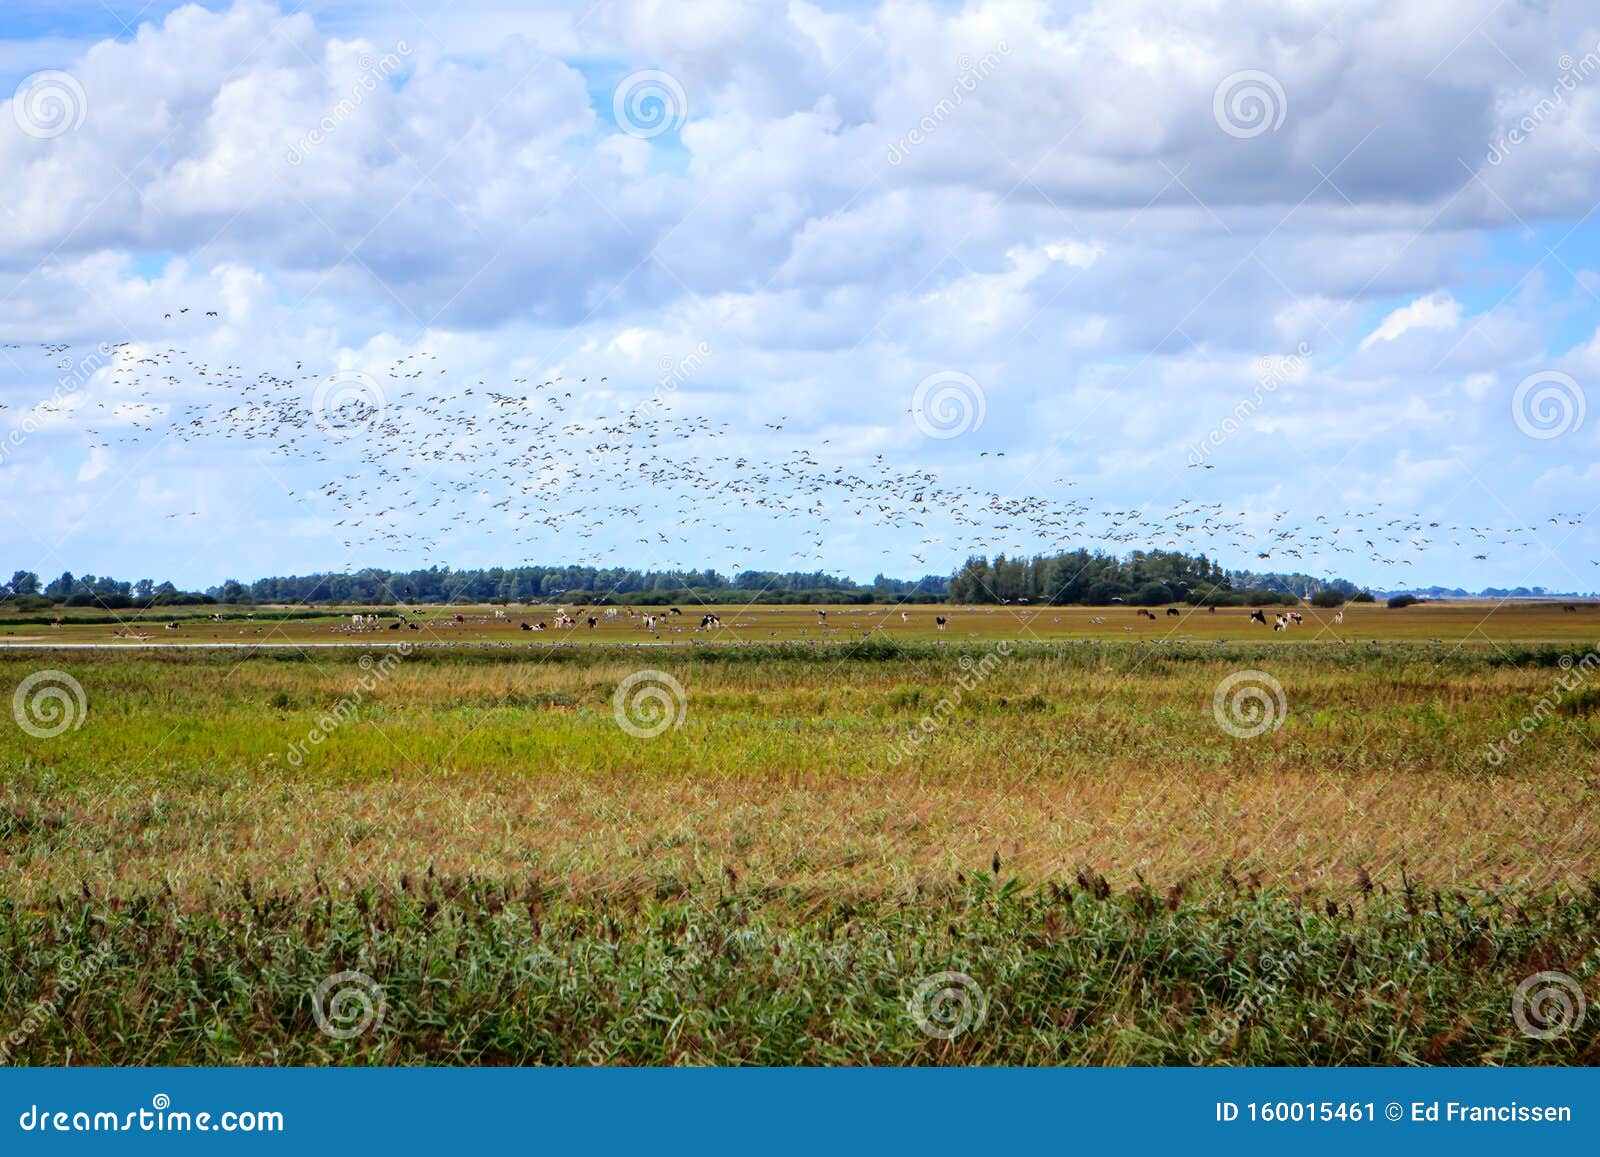 migratory birds gather above the wadden area.